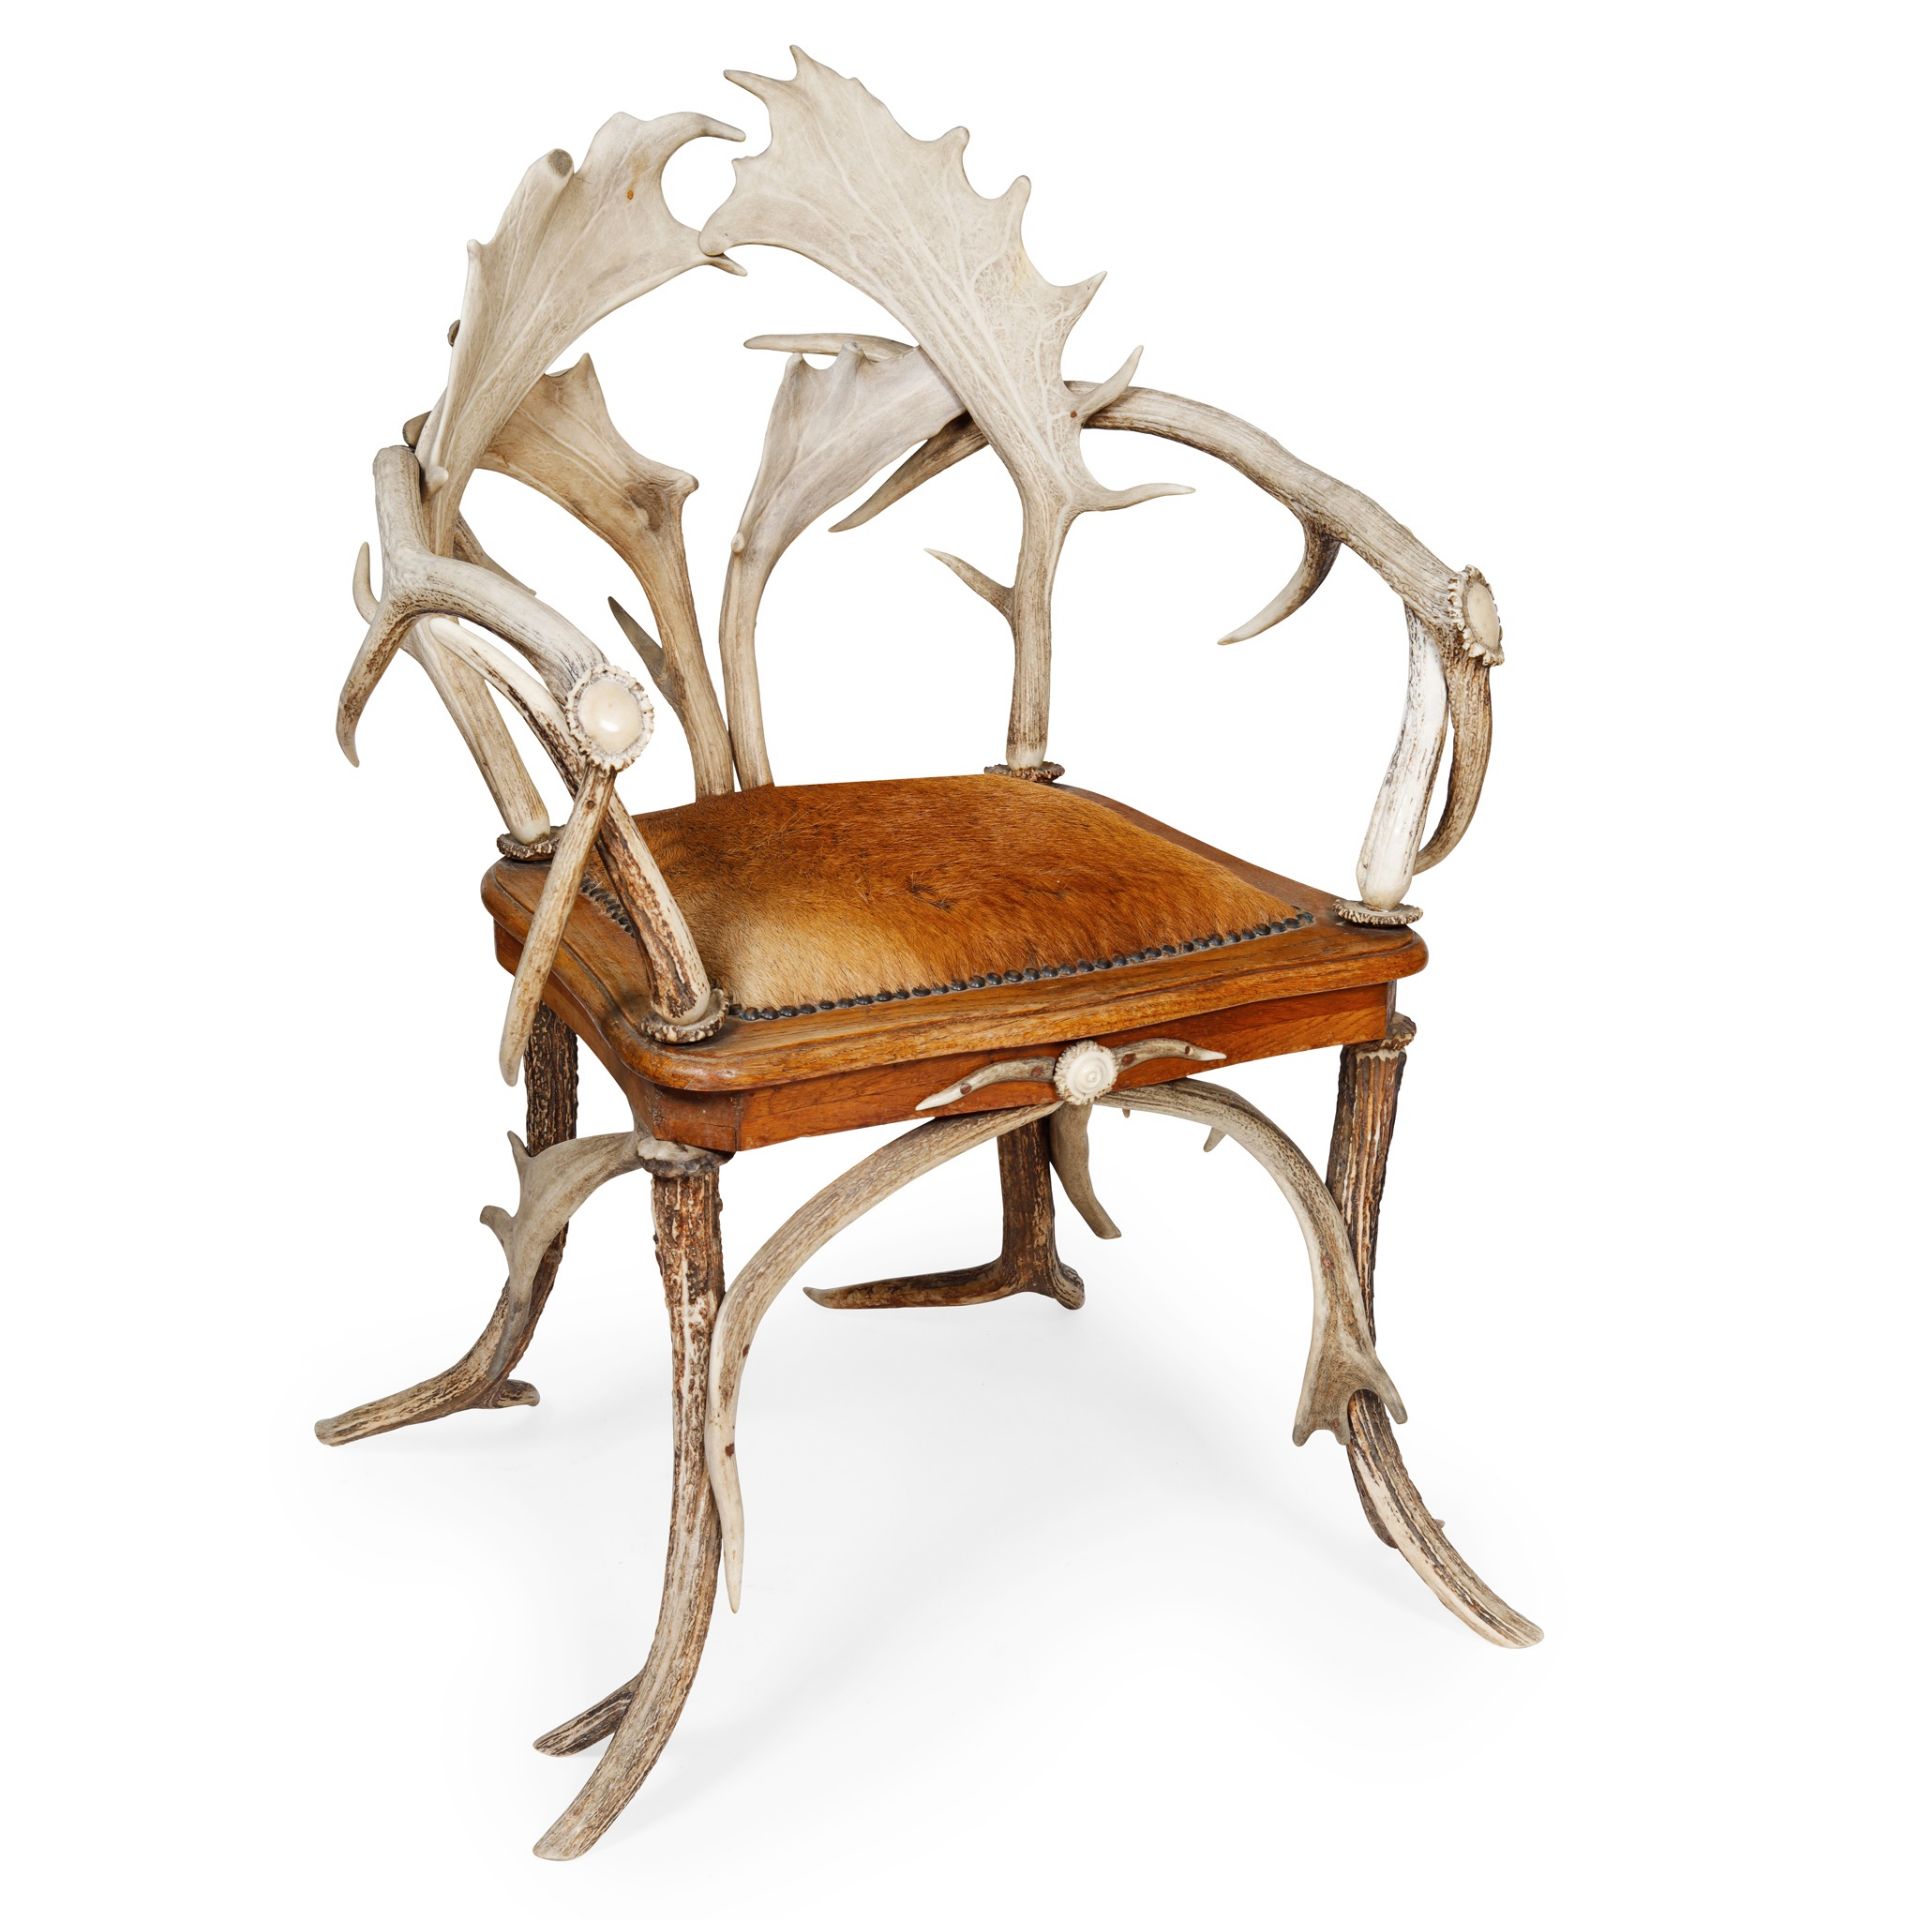 GERMAN ANTLER FRAMED OPEN ARMCHAIR LATE 19TH/EARLY 20TH CENTURY